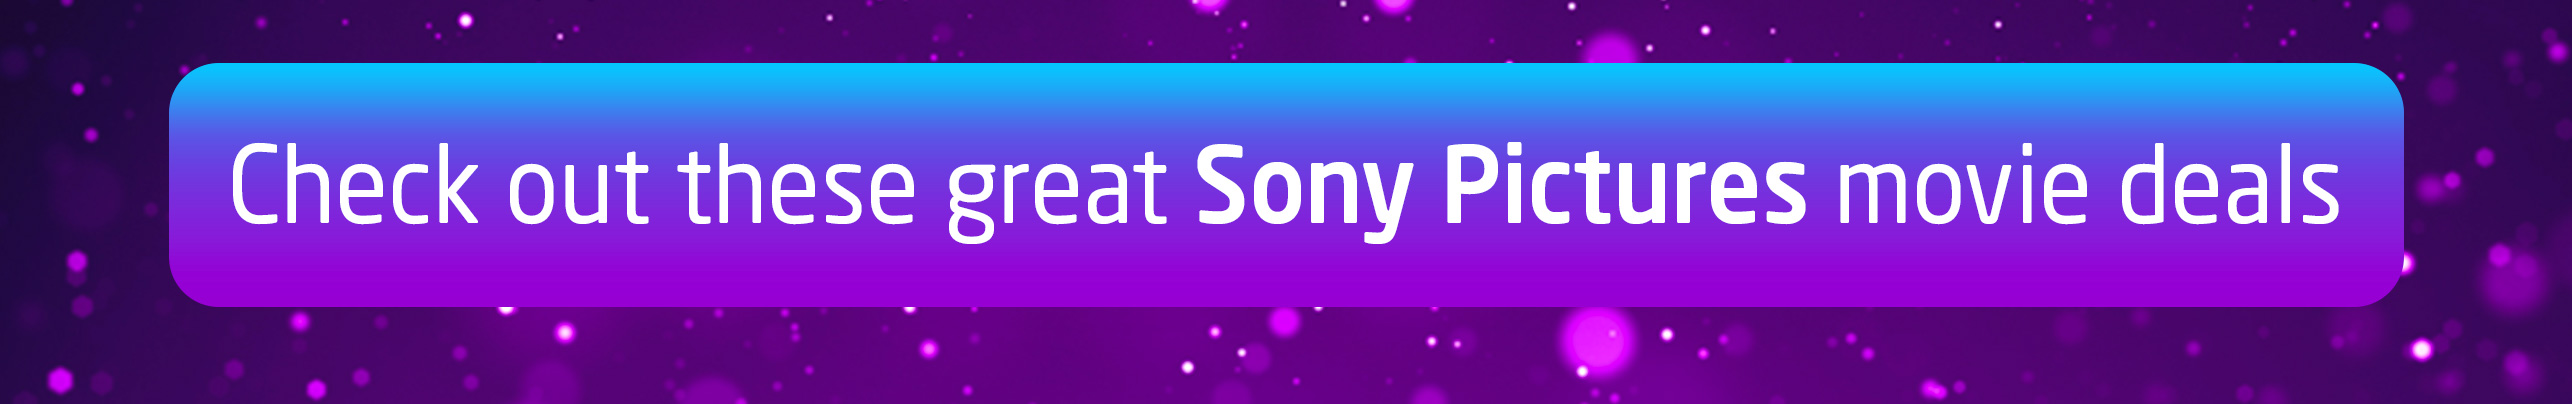 Sony Pictures Special Deals